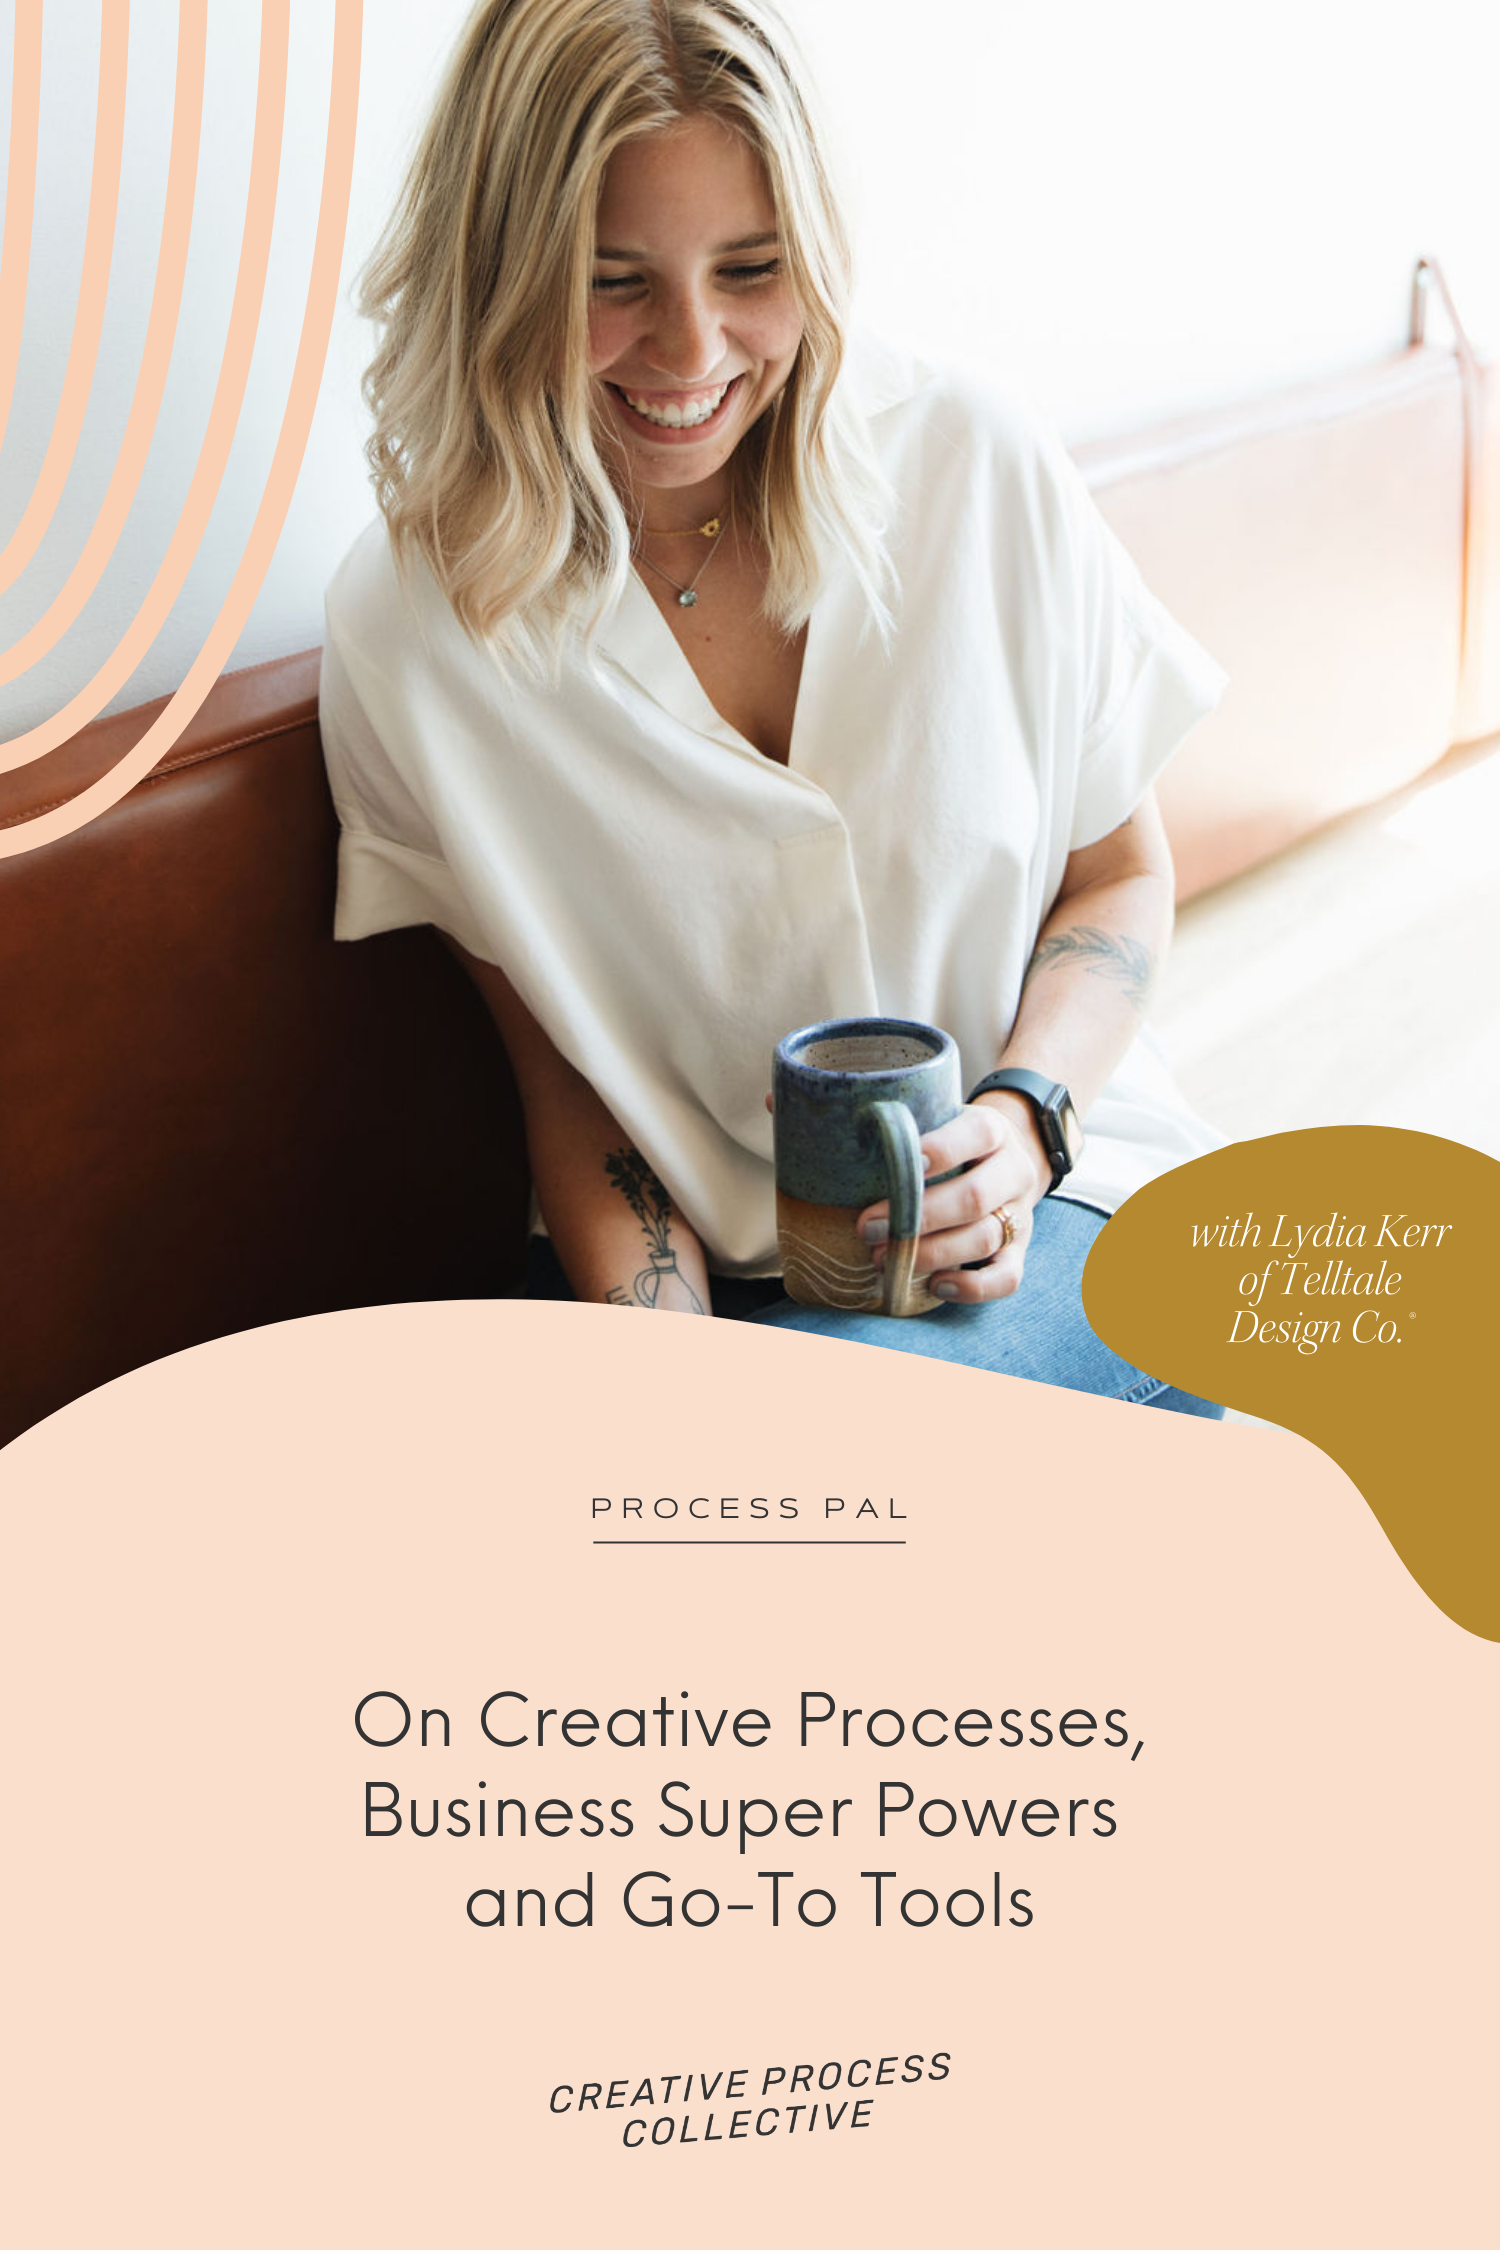 Process Pal Interview with Lydia Kerr of Telltale Design Co®